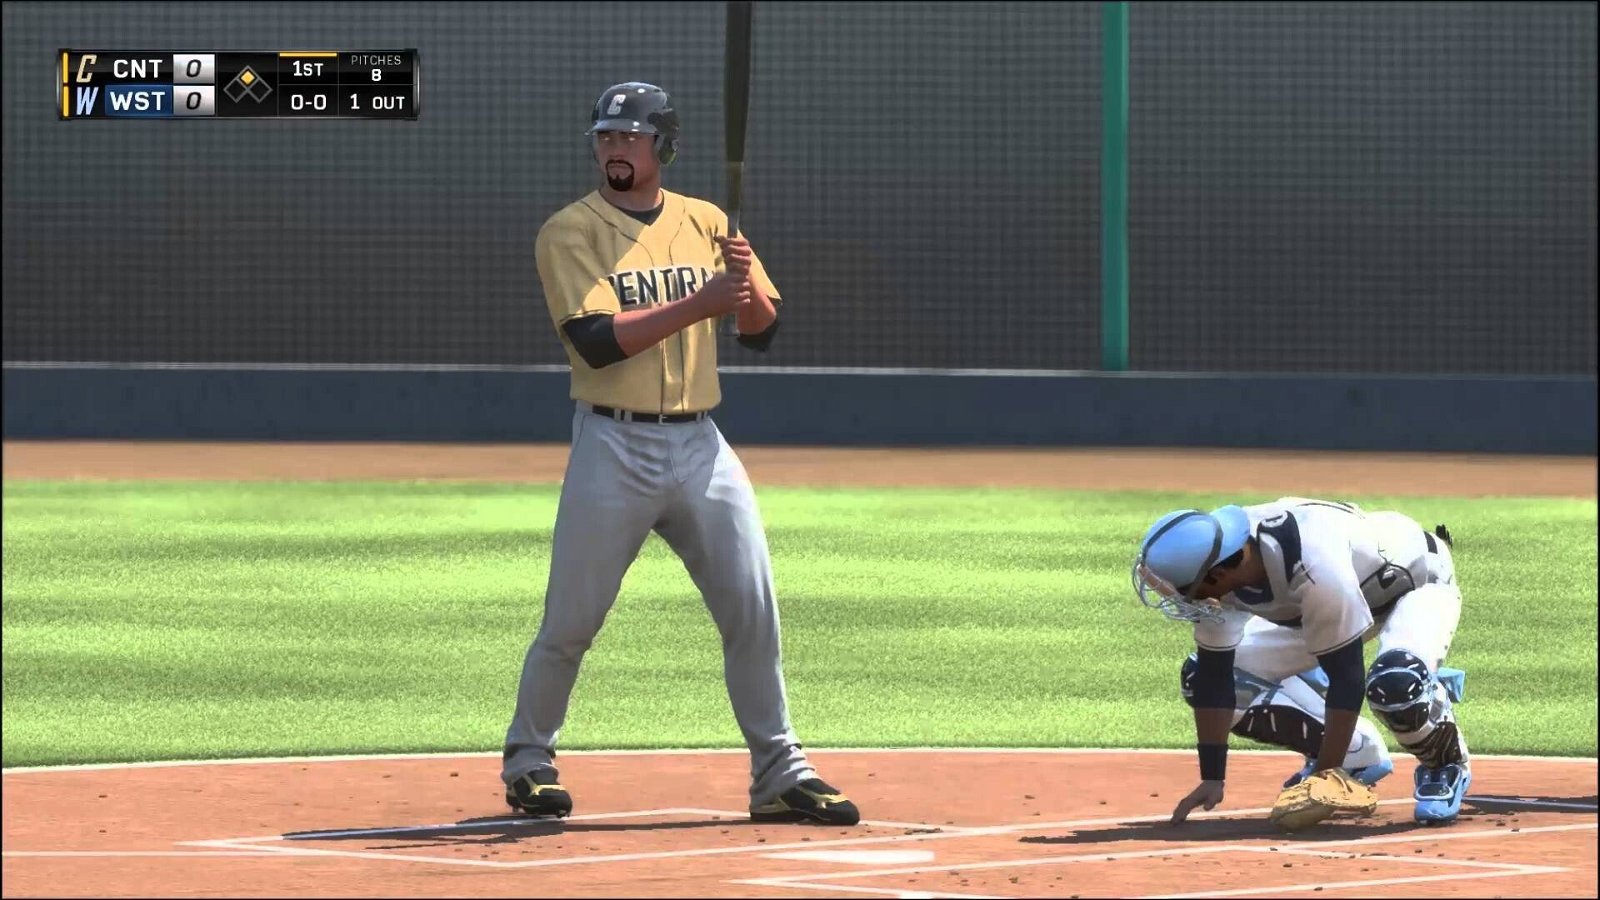 Mlb: The Show 16 (Ps4) Review 3